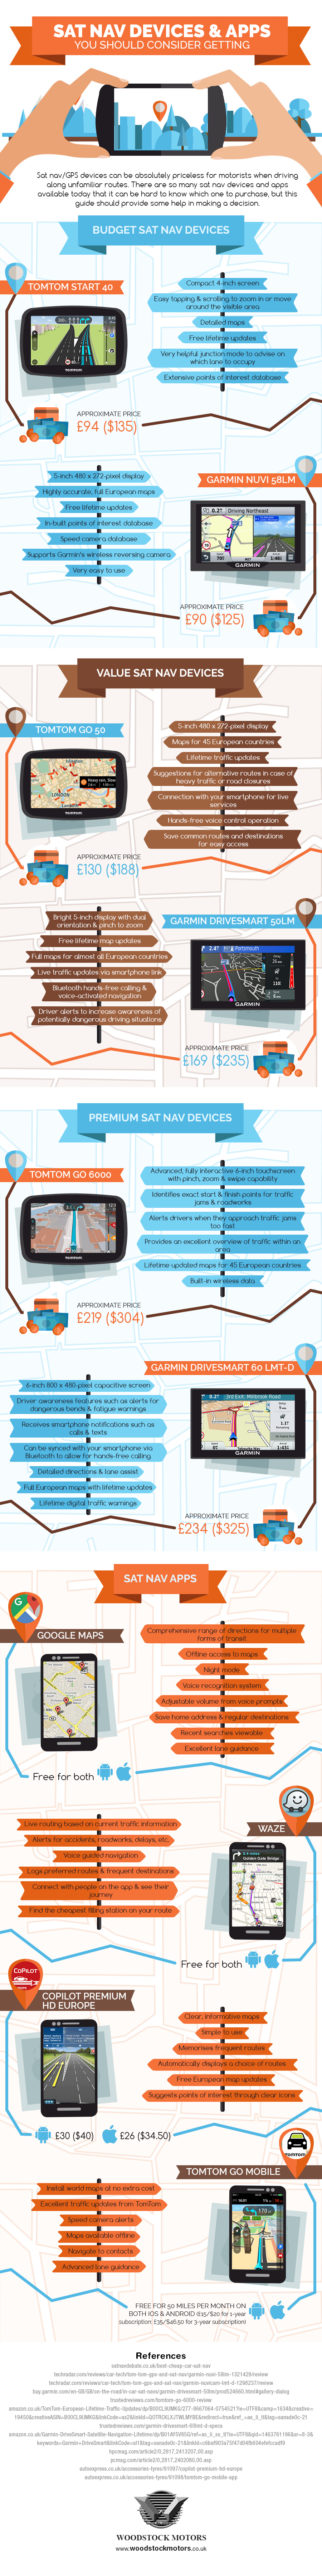 Satnav Devices & Apps You Should Consider Getting [Infographic]